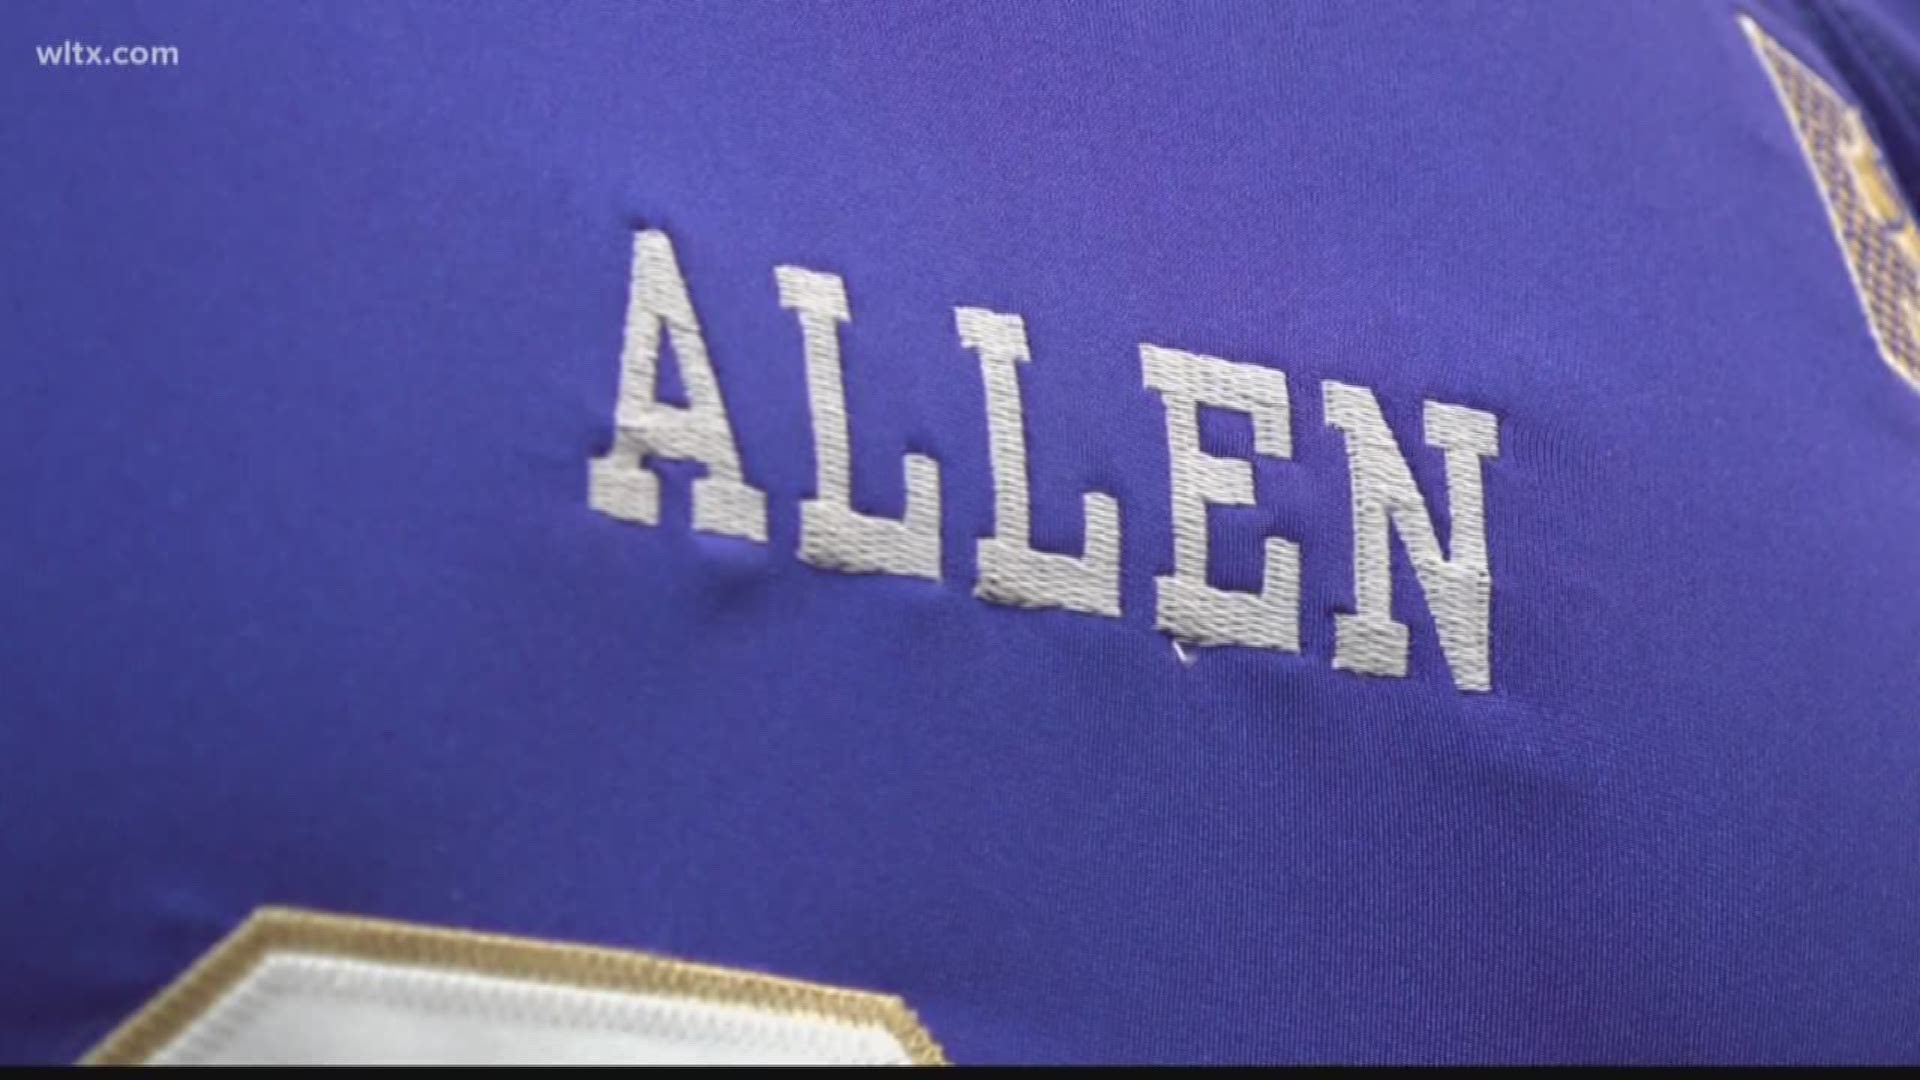 History is happening at Allen University. 
	For more than a decade there's been no action on the football field for the yellow jackets but come this fall things are about to change. 